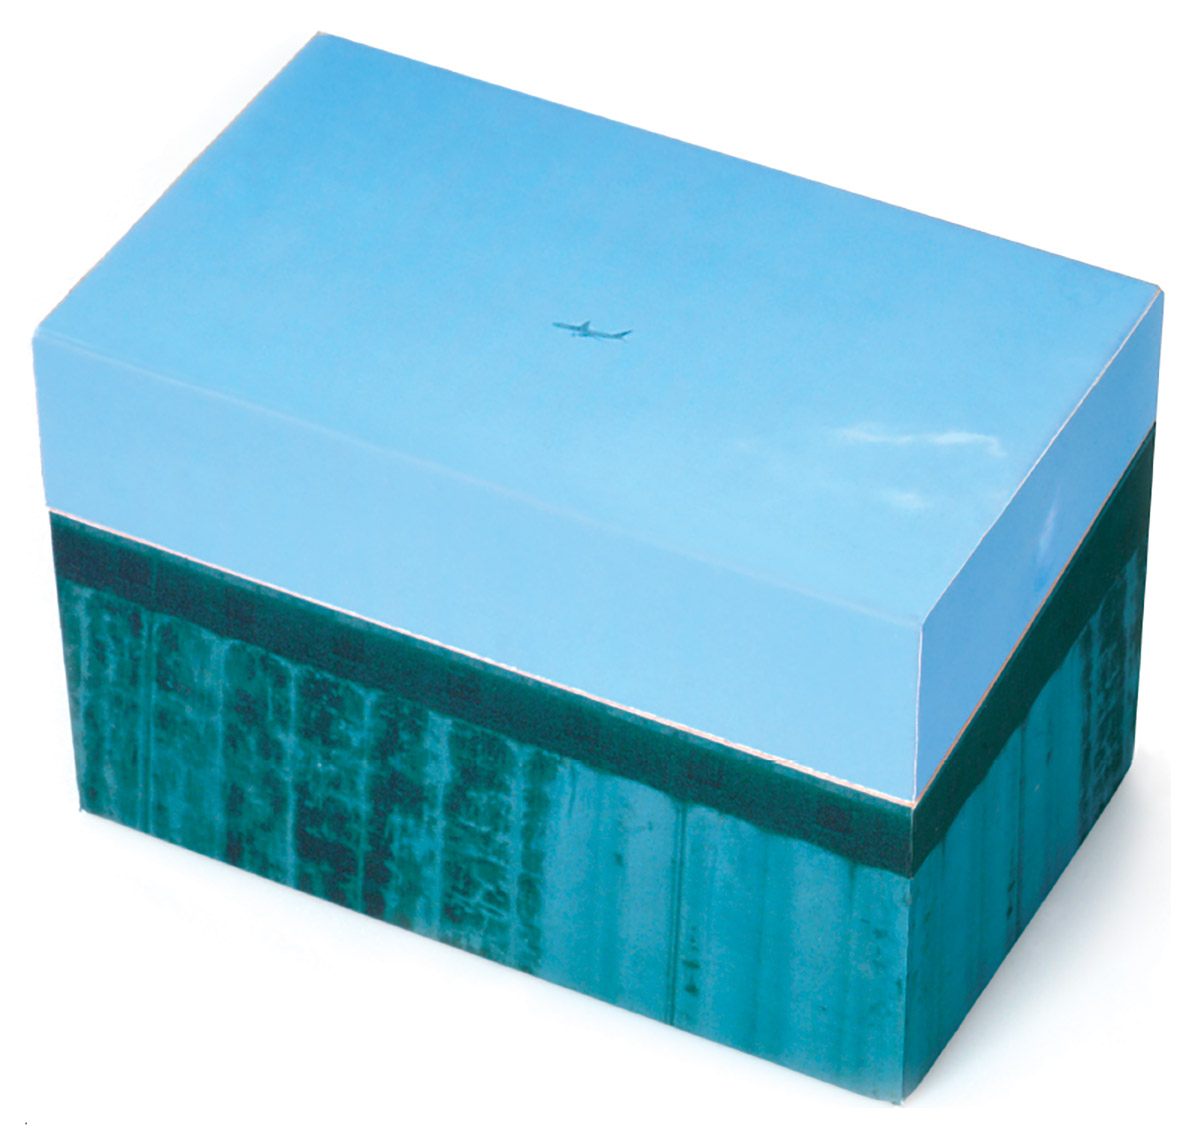 A white background with a box depicting an airplane in a clear sky.